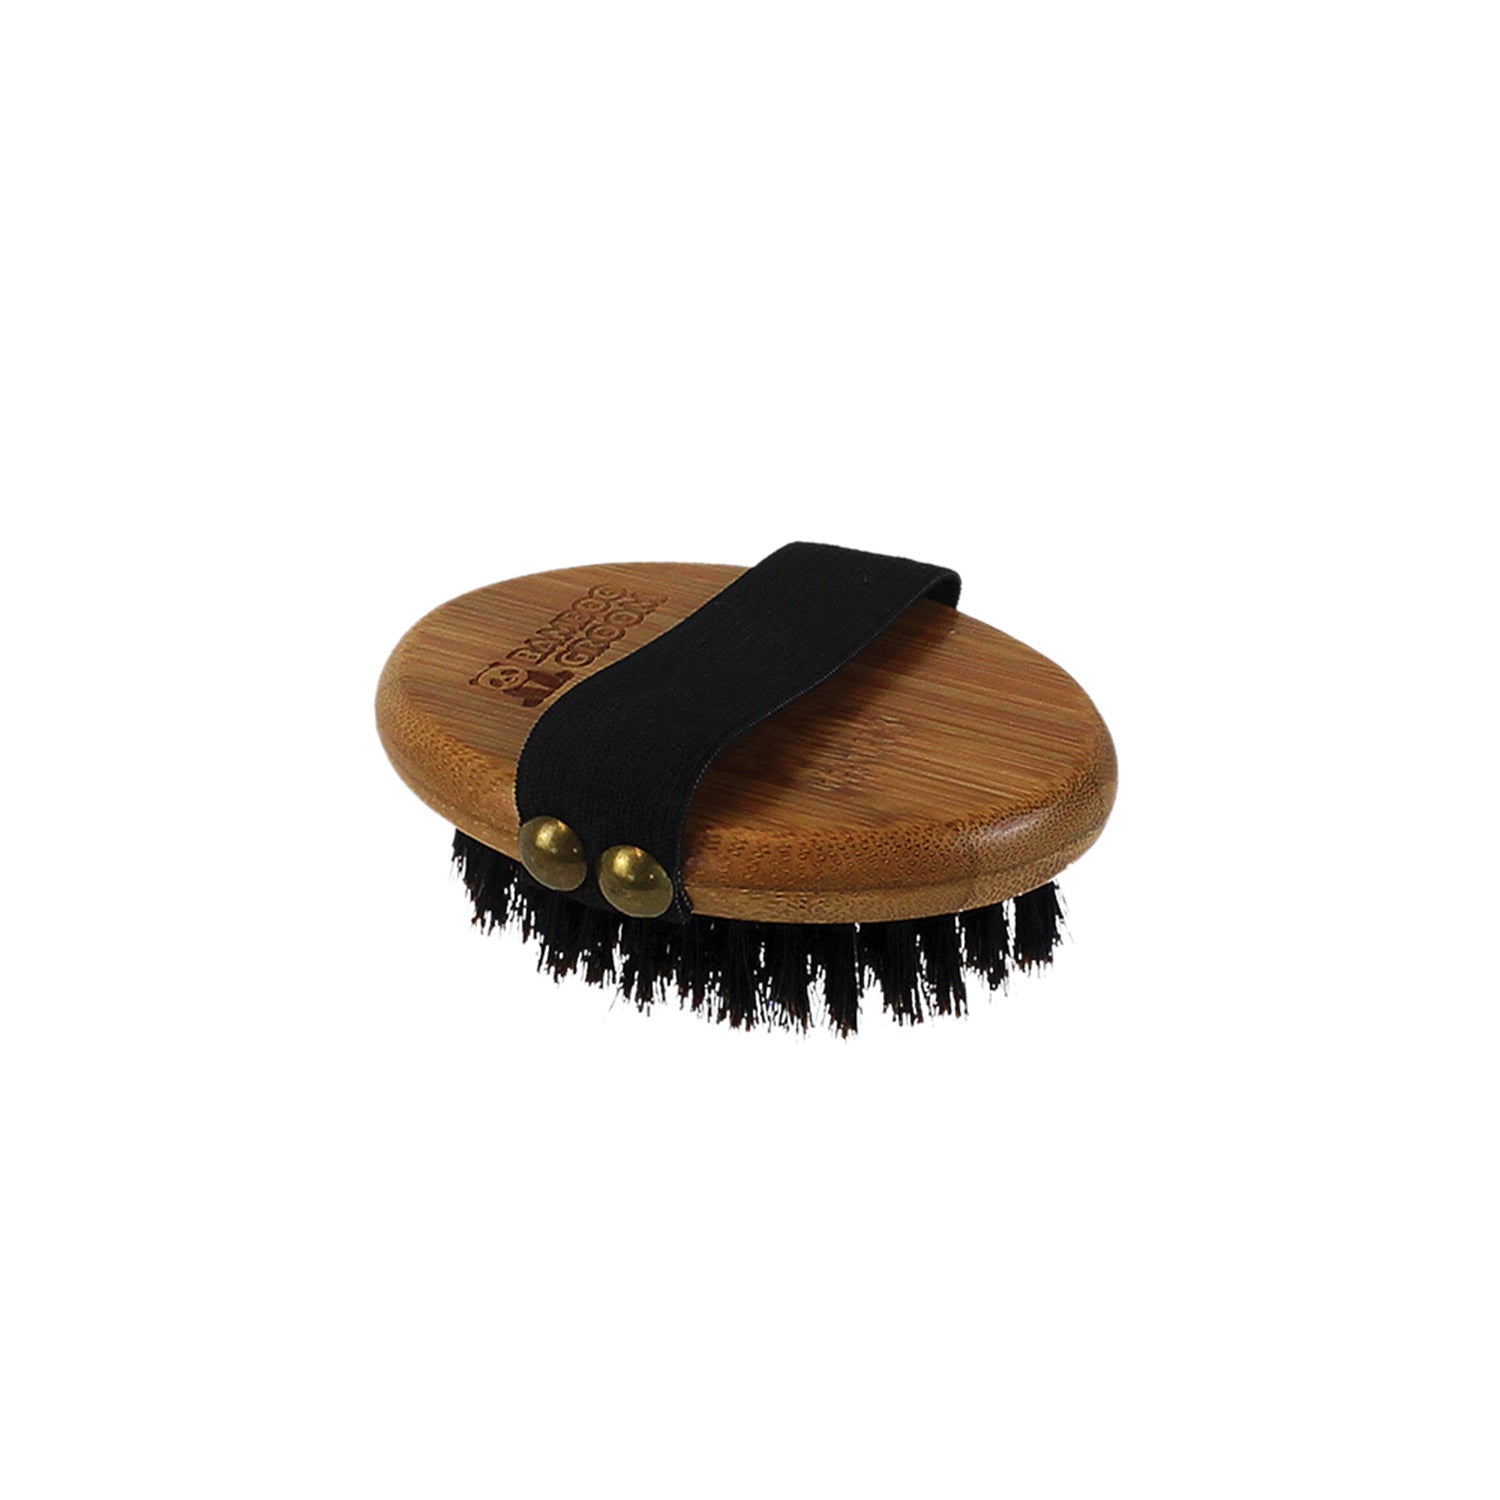 Bamboo Groom Palm Brush with Boar Bristles